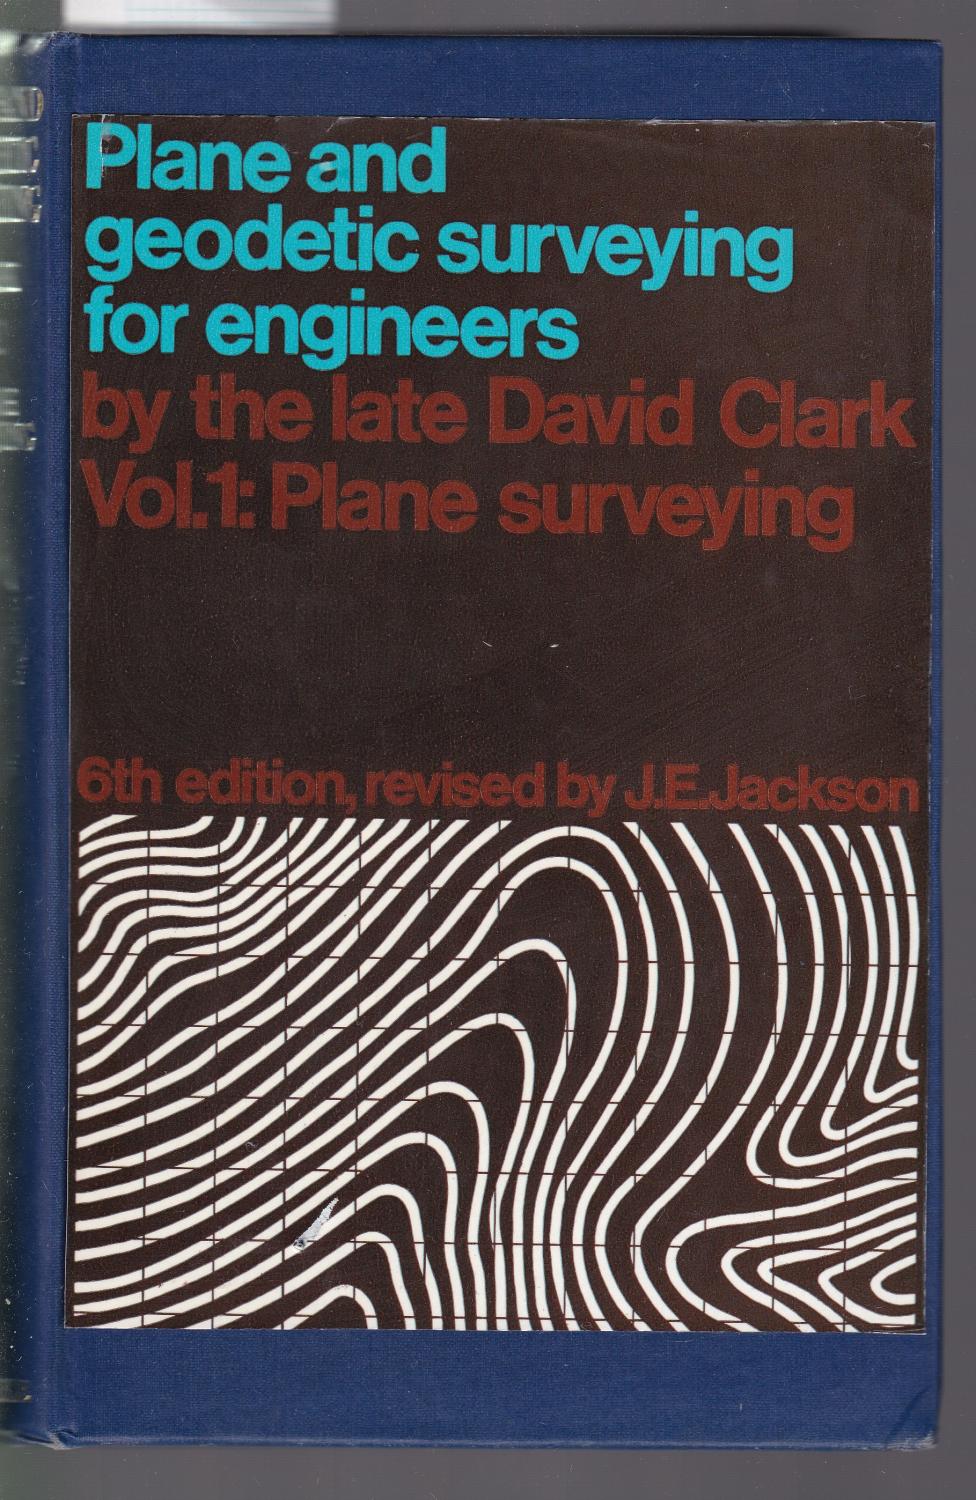 Plane and Geodetic Surveying for Engineers By the Late David Clark Vol.1 Plane Surveying - Clark, David Revised By J. E. Jackson